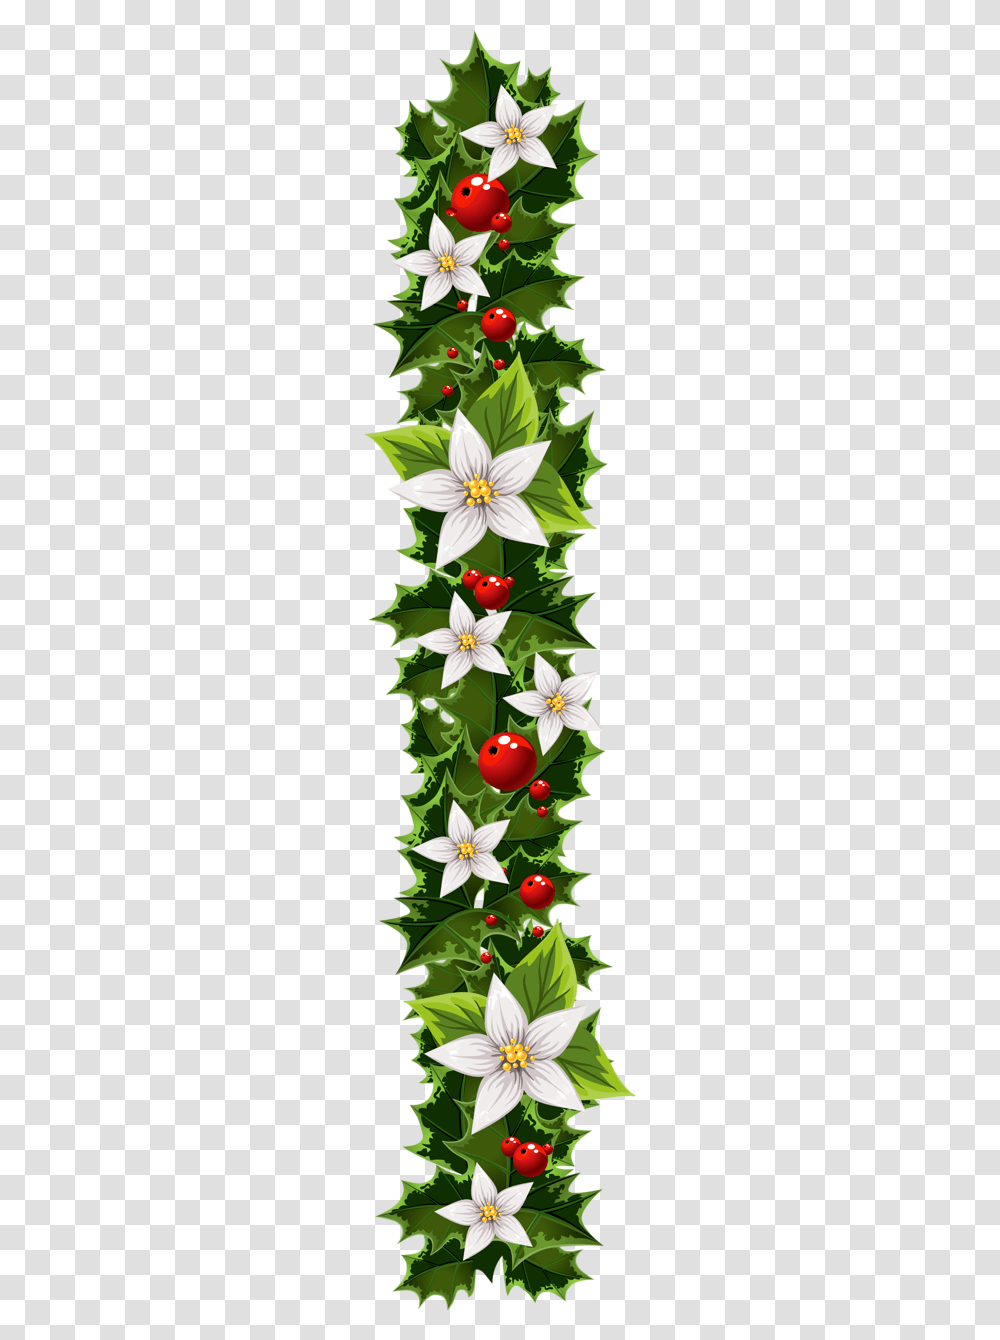 Christmas Garland Clipart Christmas Amp Christmas Garland Clipart, Leaf, Plant, Tree, Strawberry Transparent Png